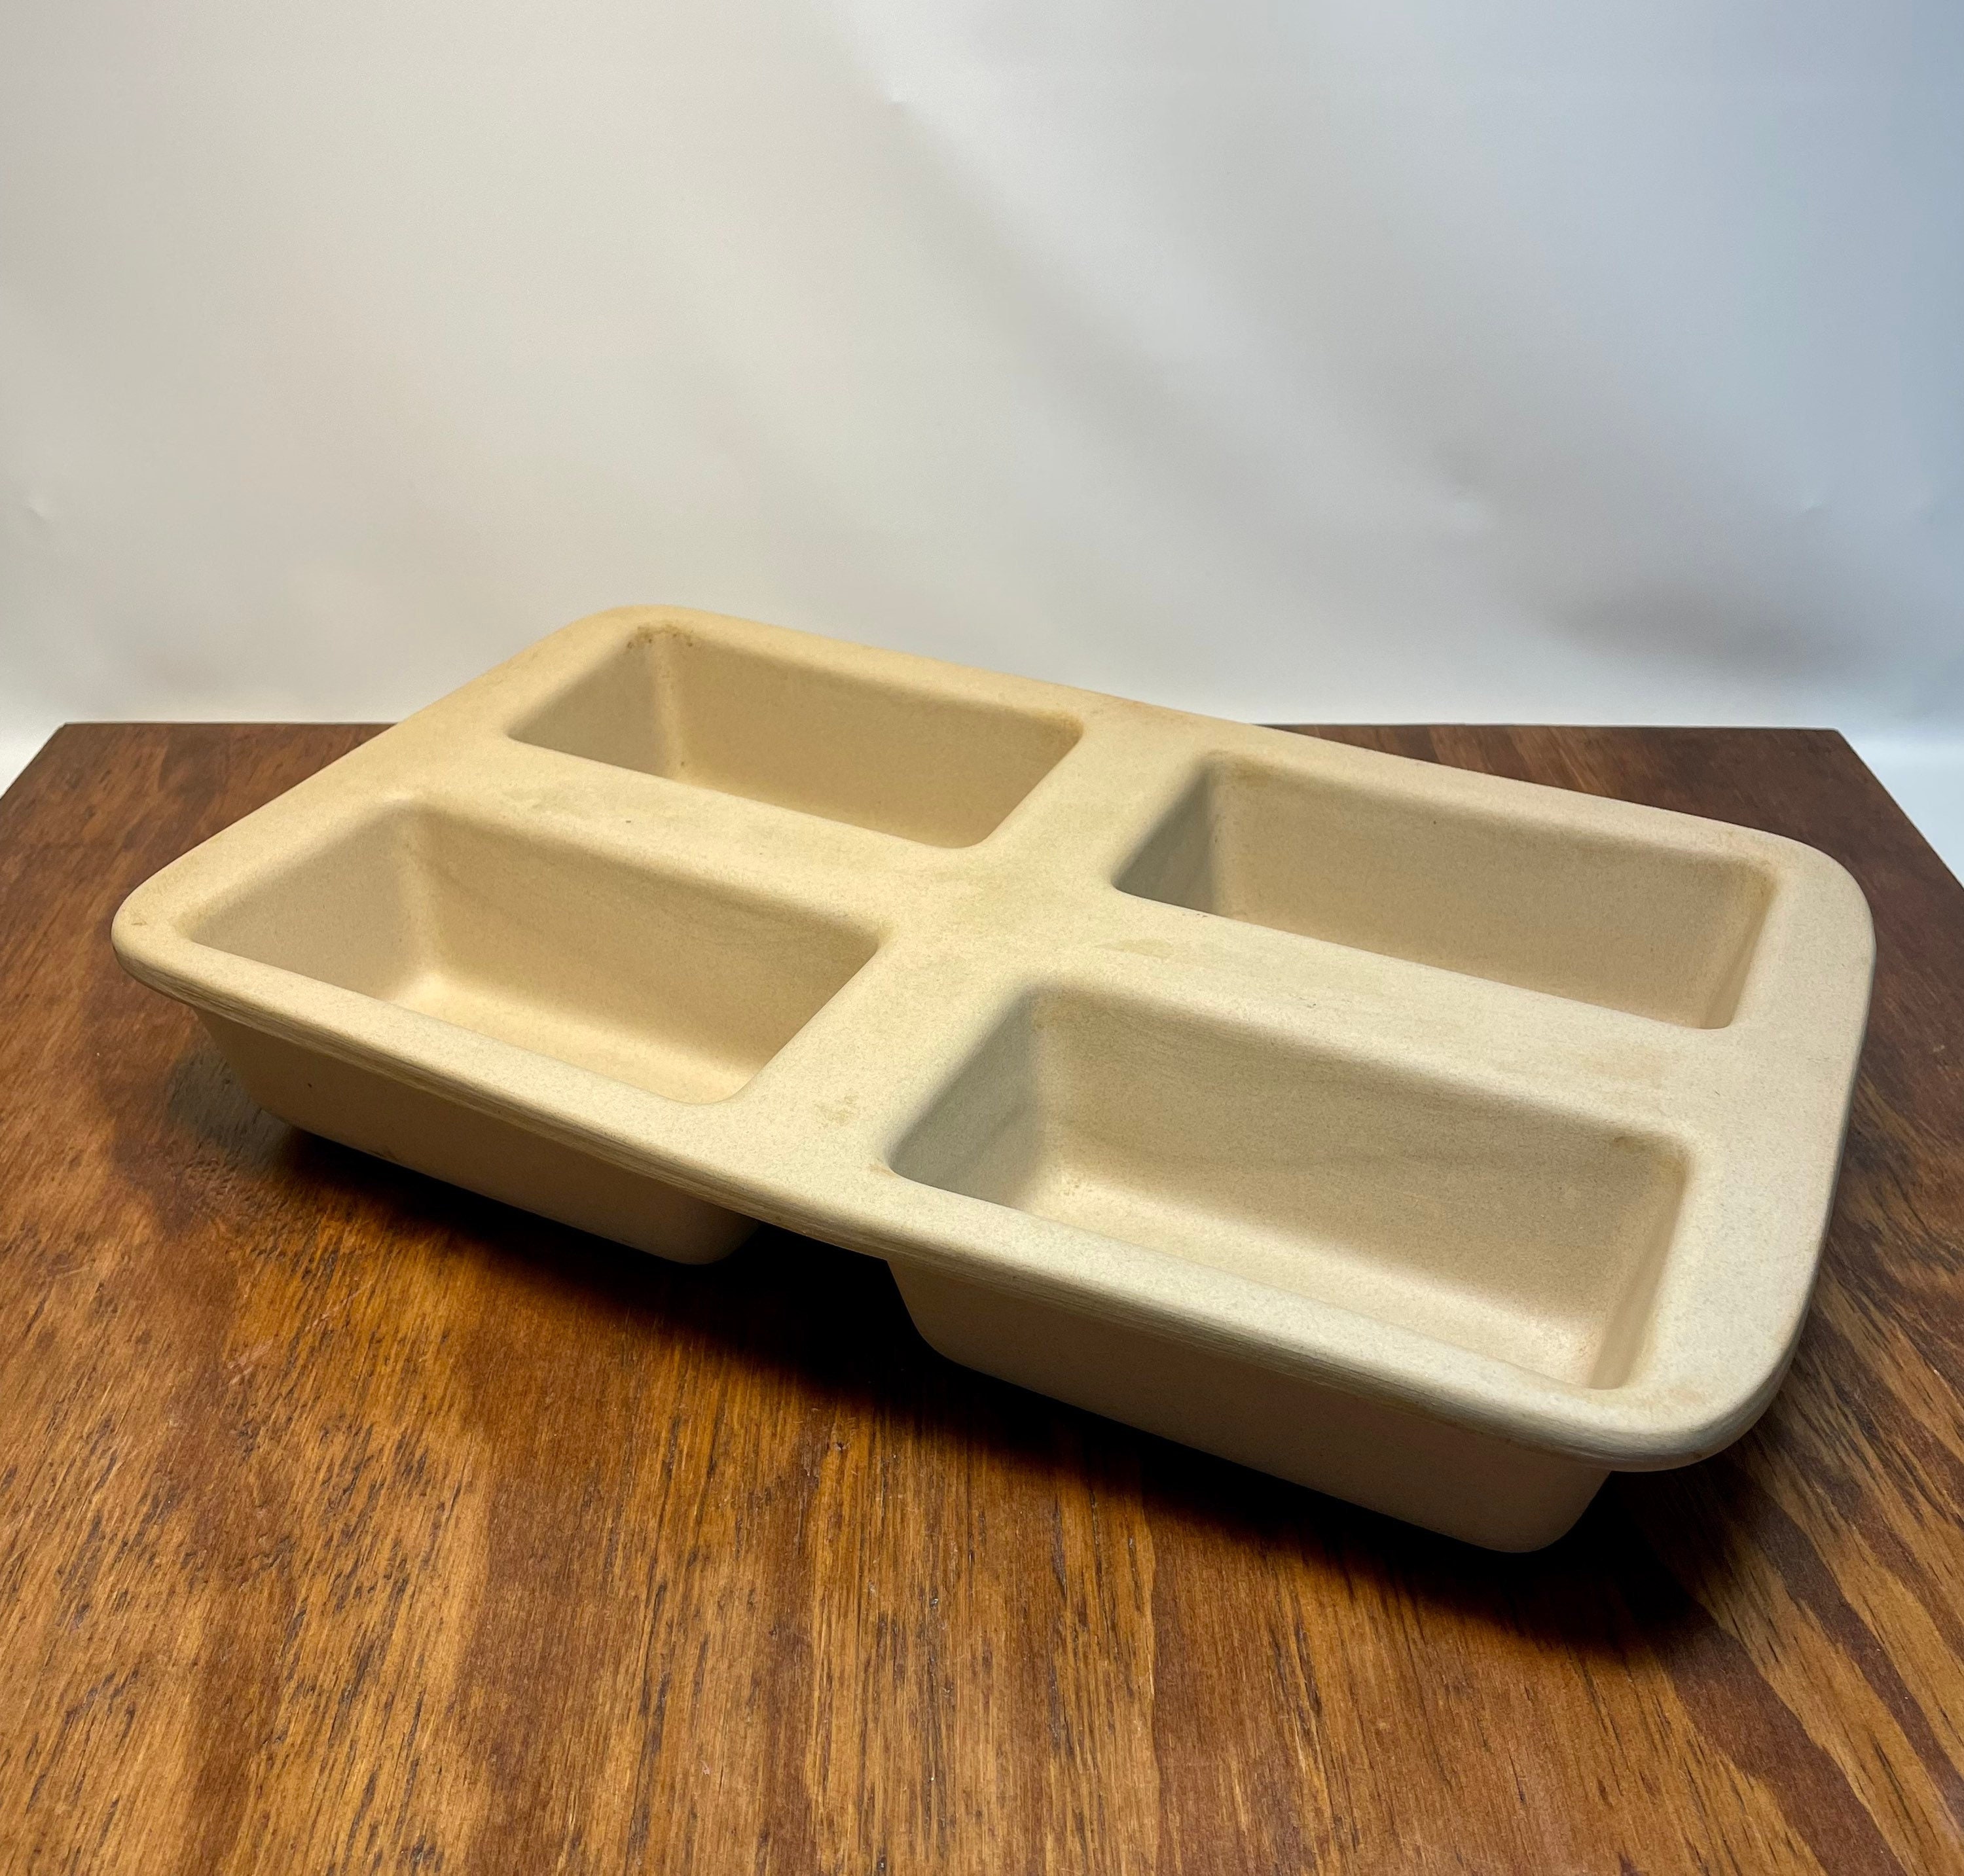 Pampered Chef Mini Loaf Pan